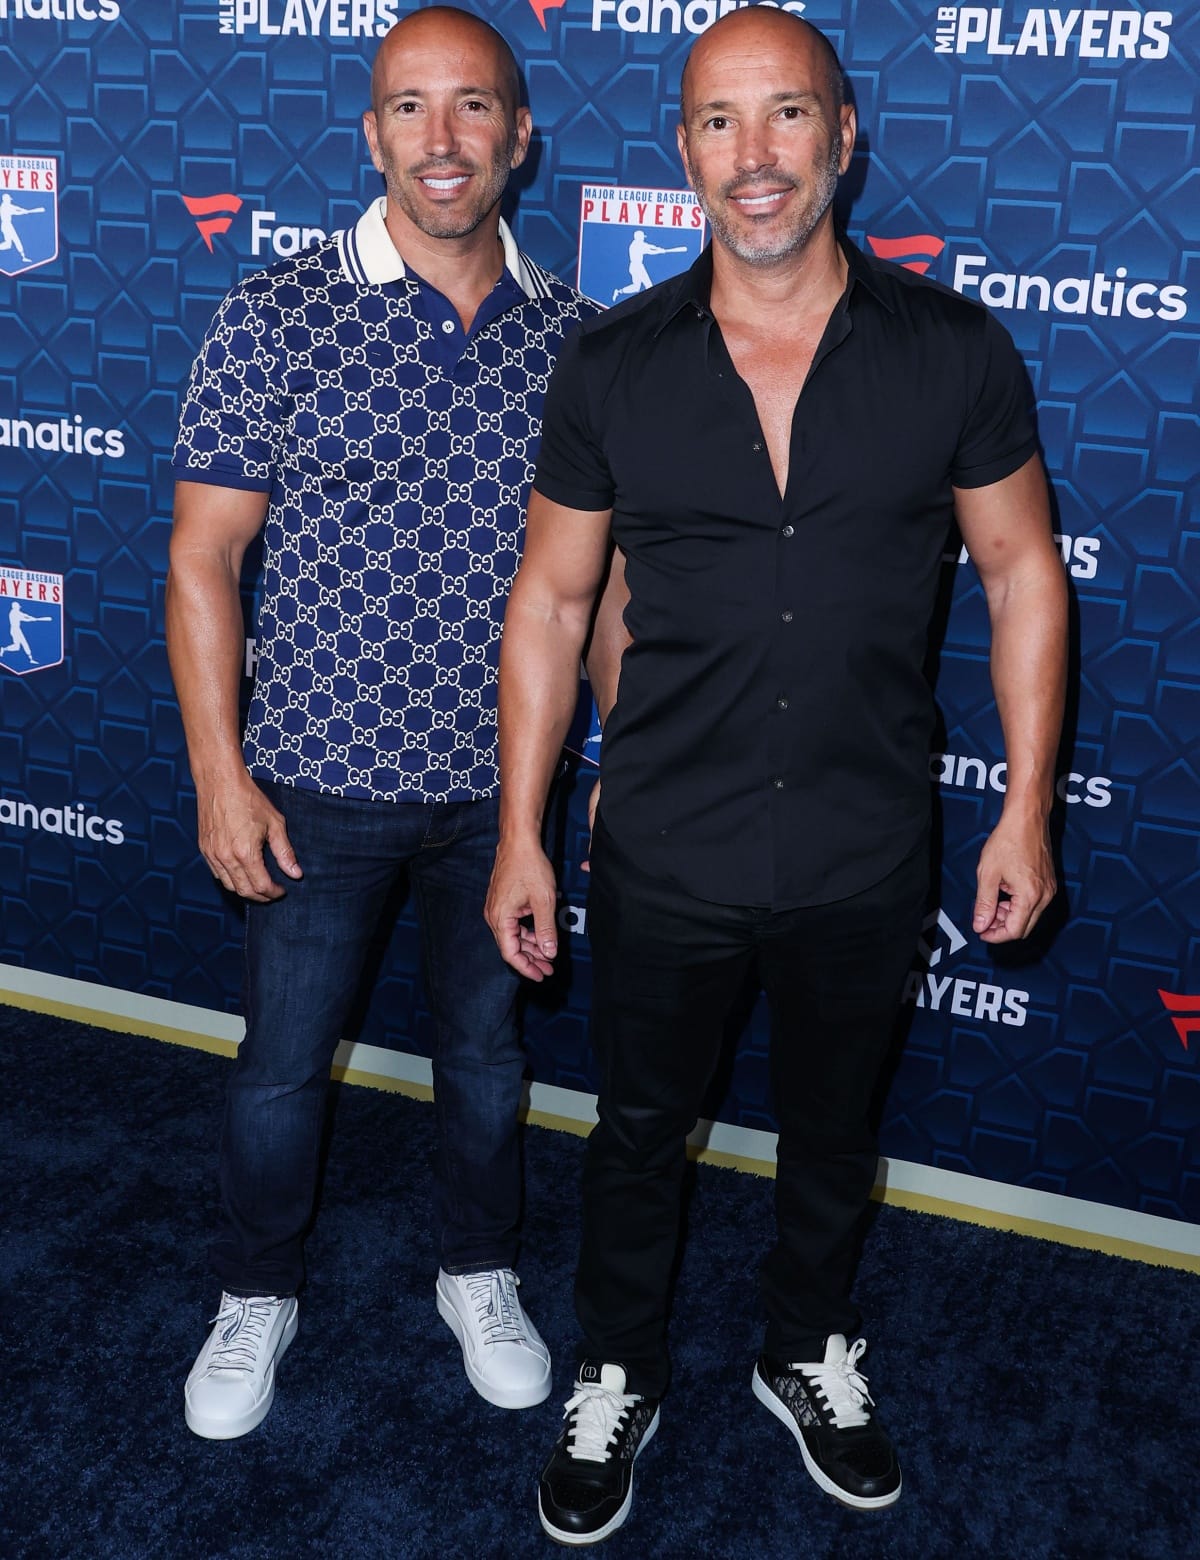 Brett and Jason Oppenheim stand at five feet and six inches, and they have a combined net worth of $100 million